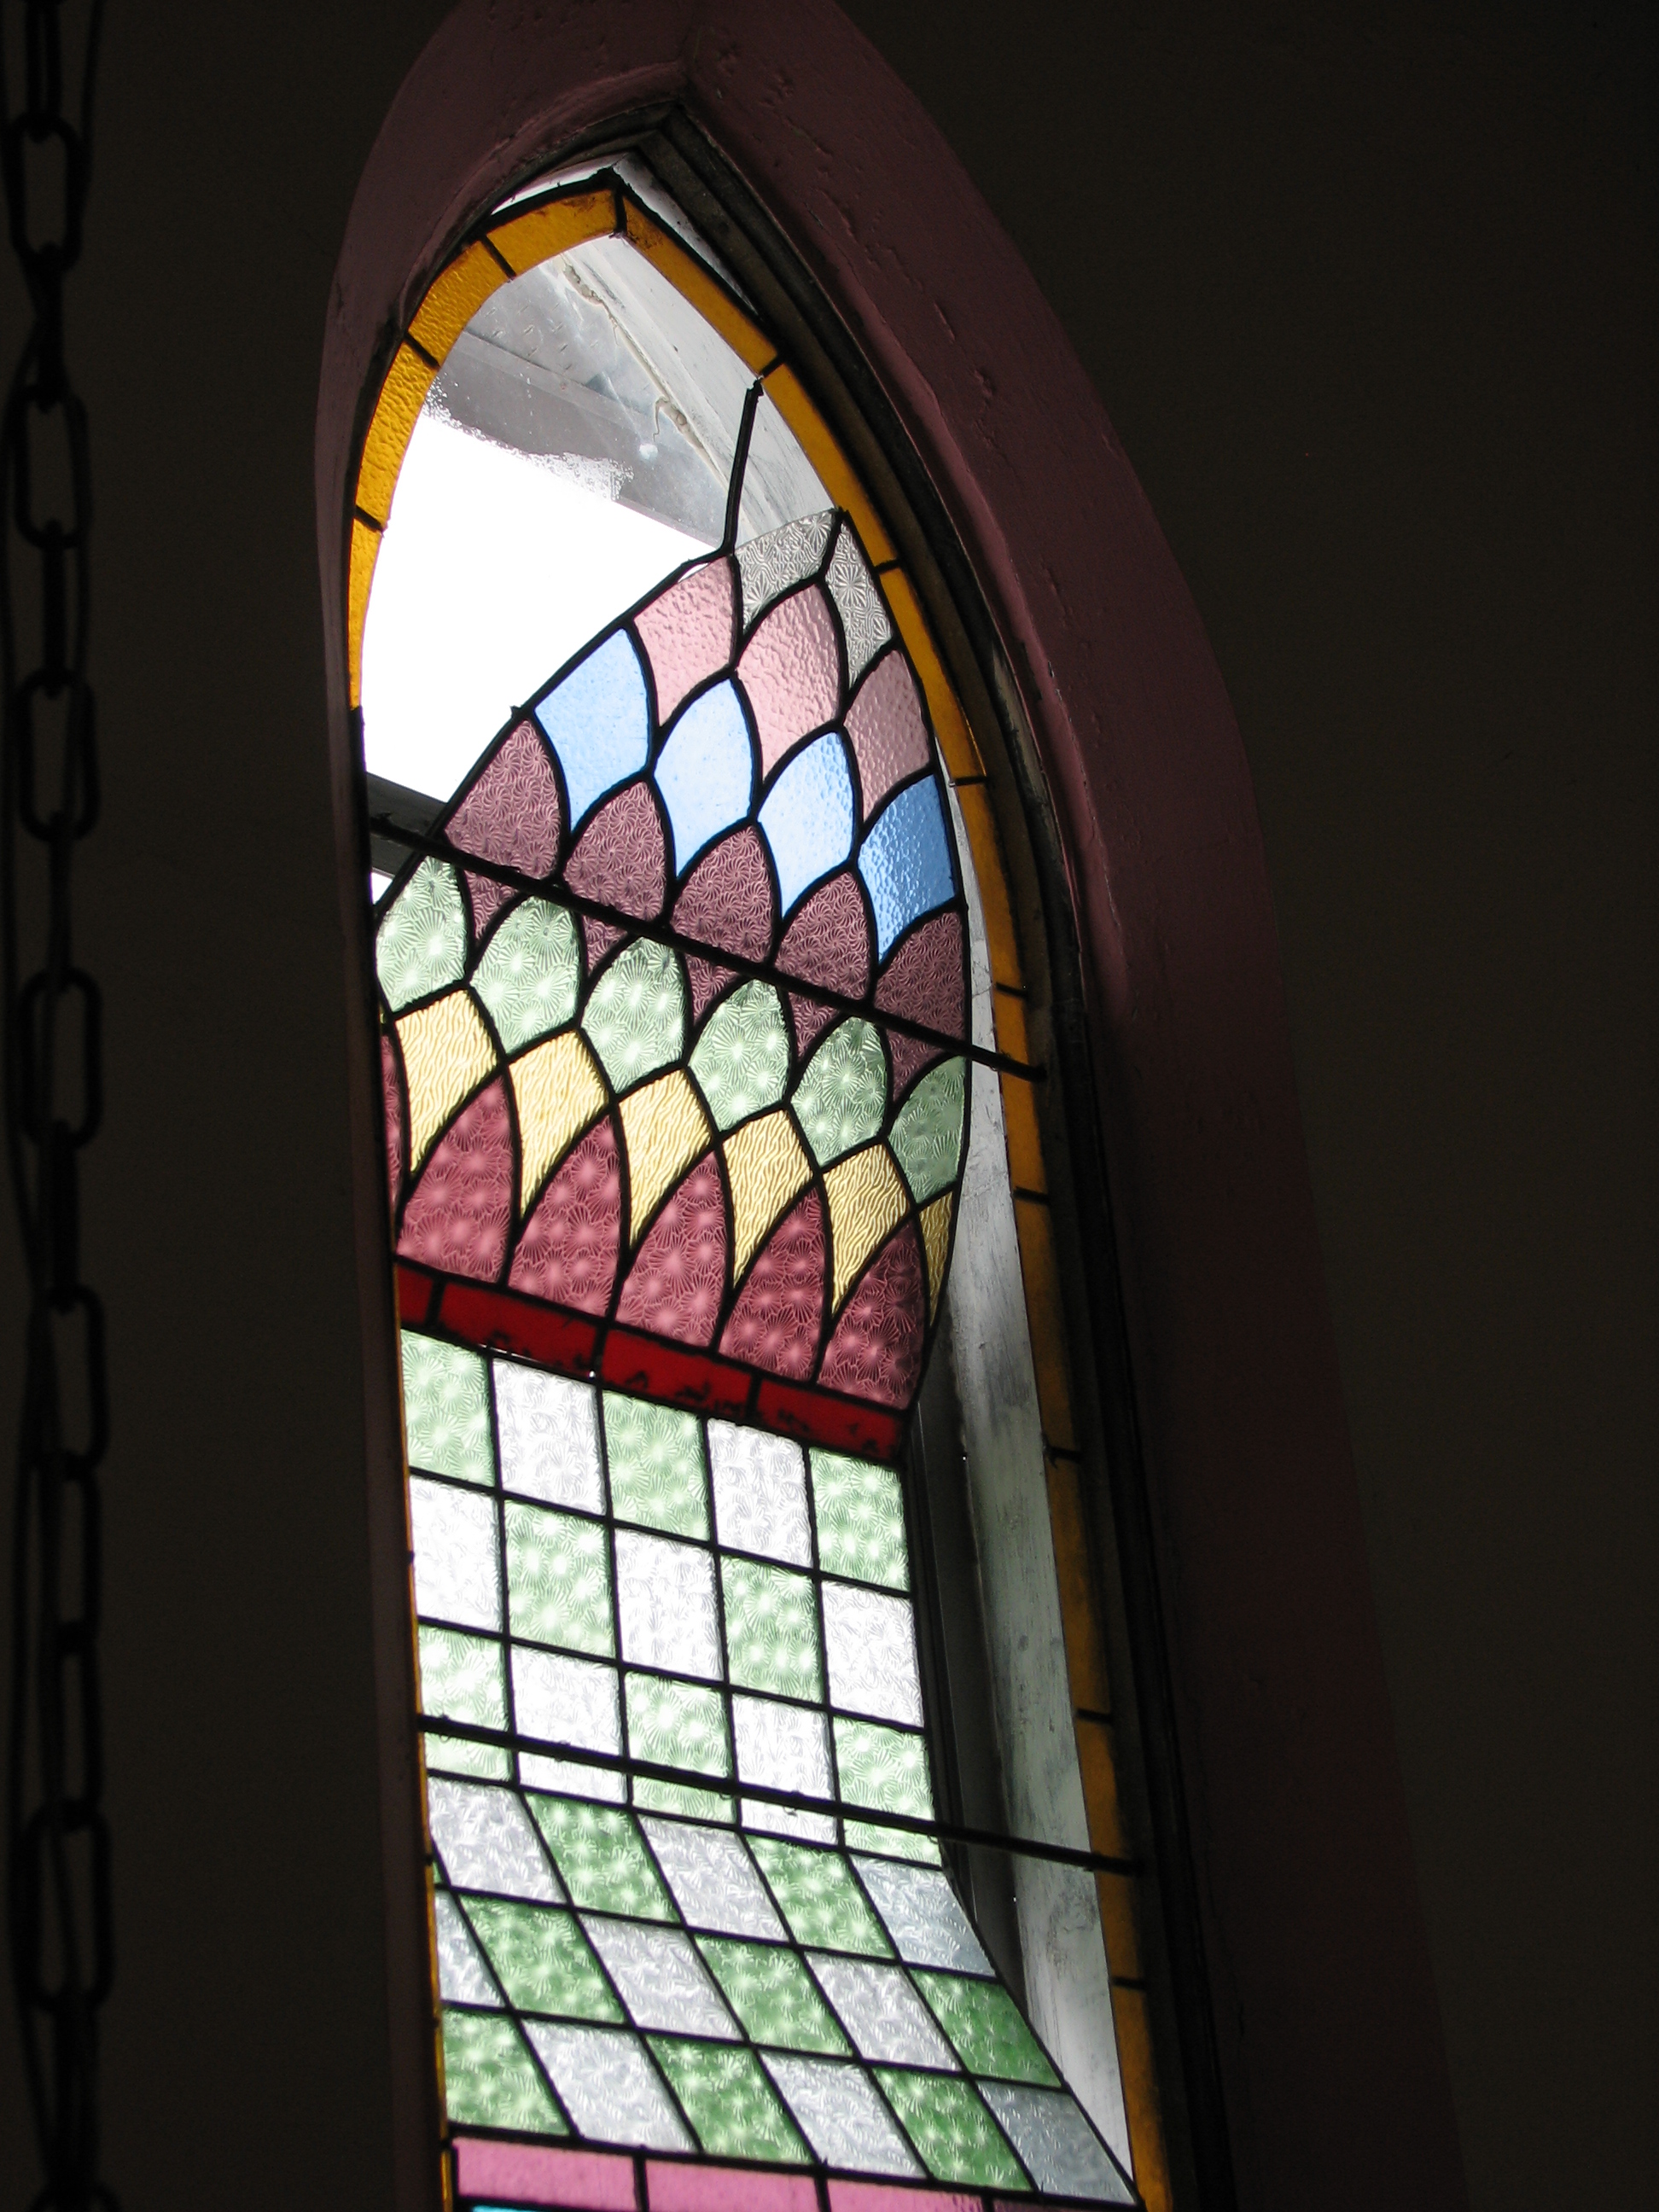 Restoration of Badly Deteriorated Stained Glass Window in Kinlough